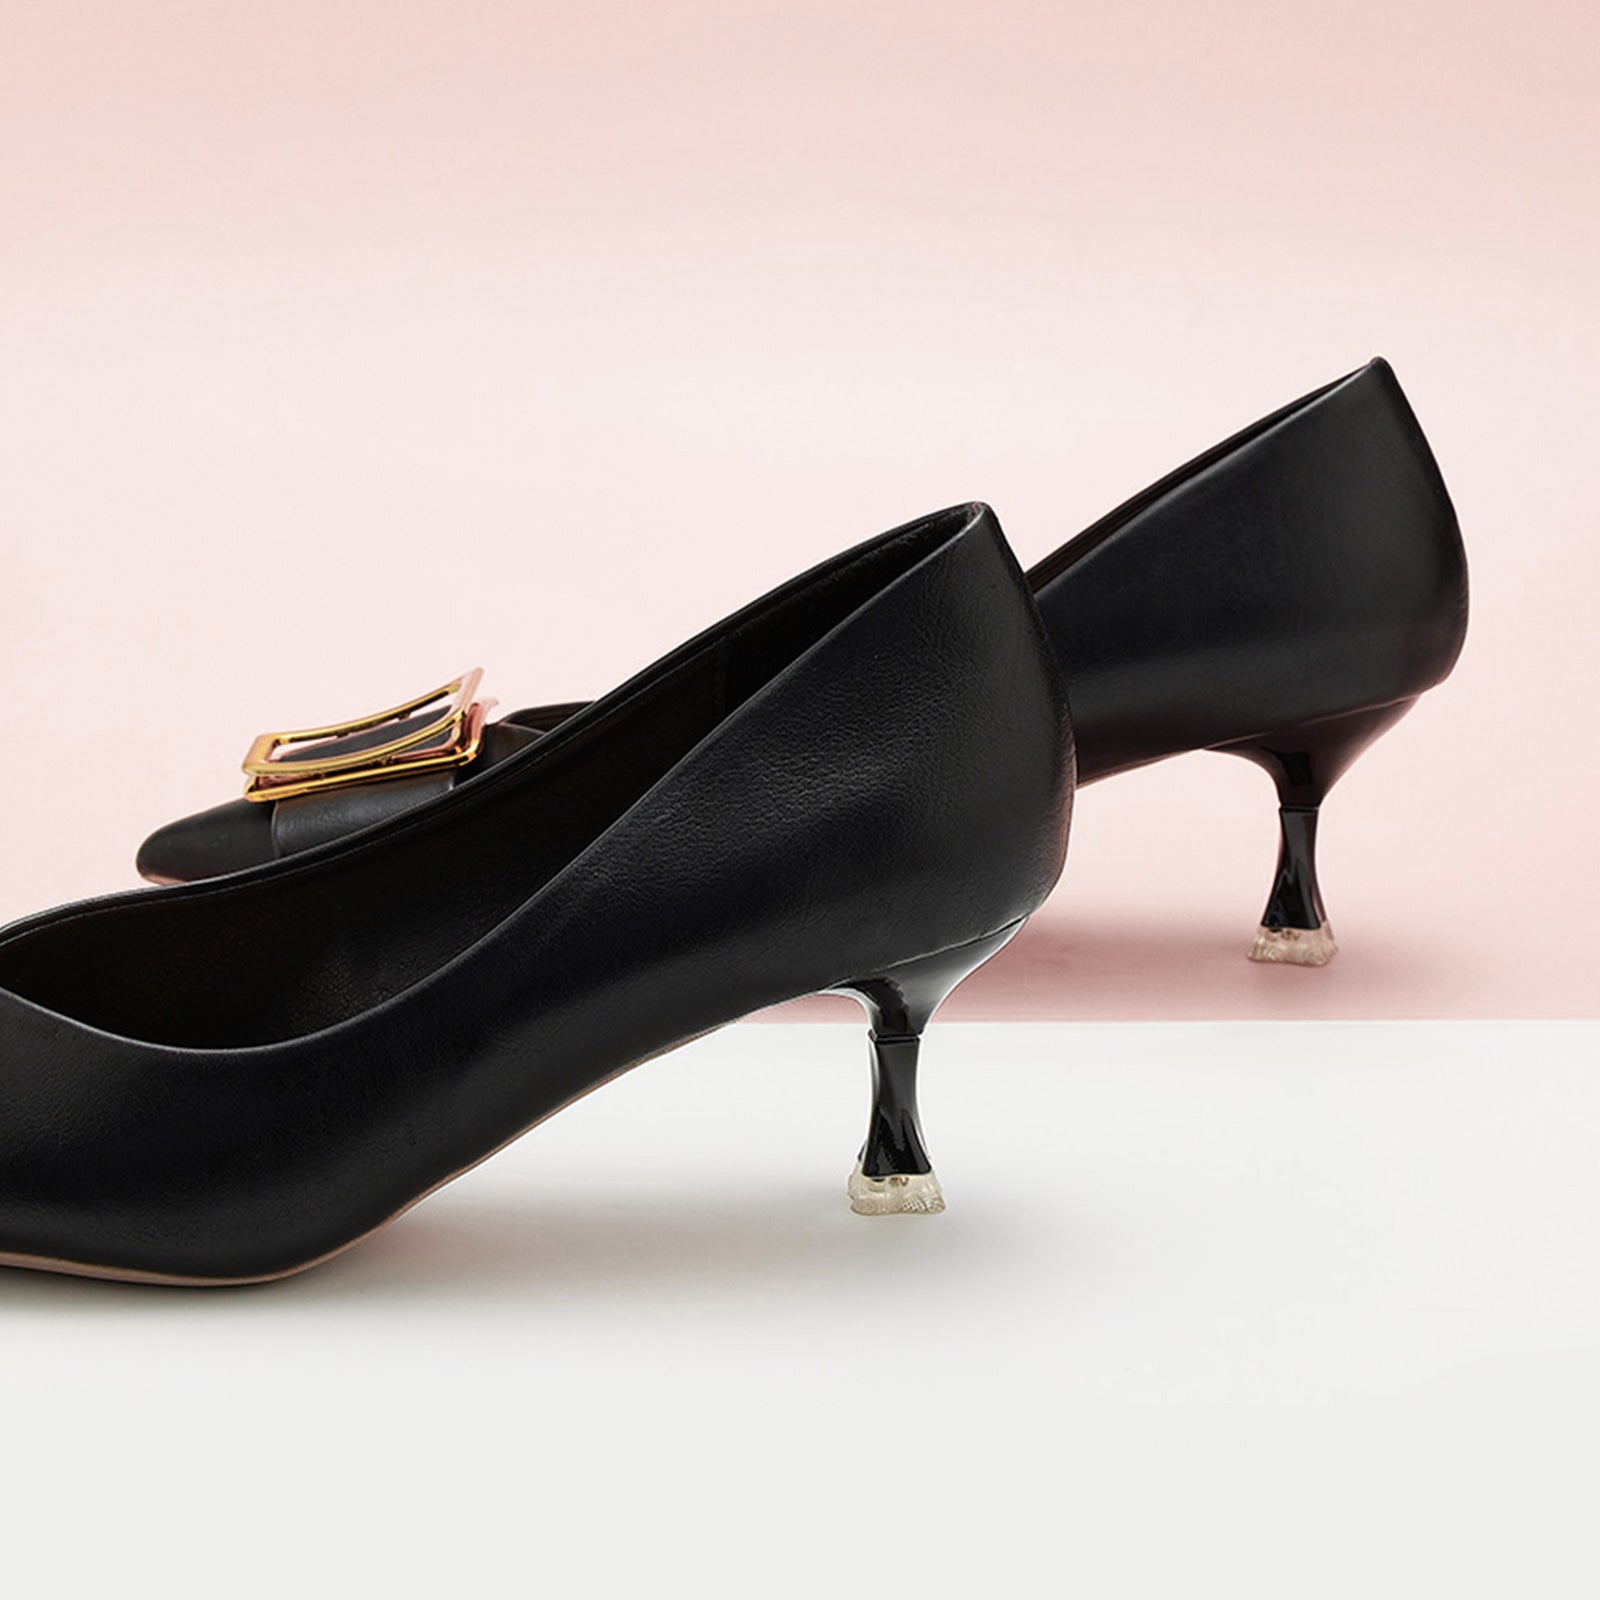 Geometric Black Kitten Heel Pumps, effortlessly blending style and comfort for any occasion.